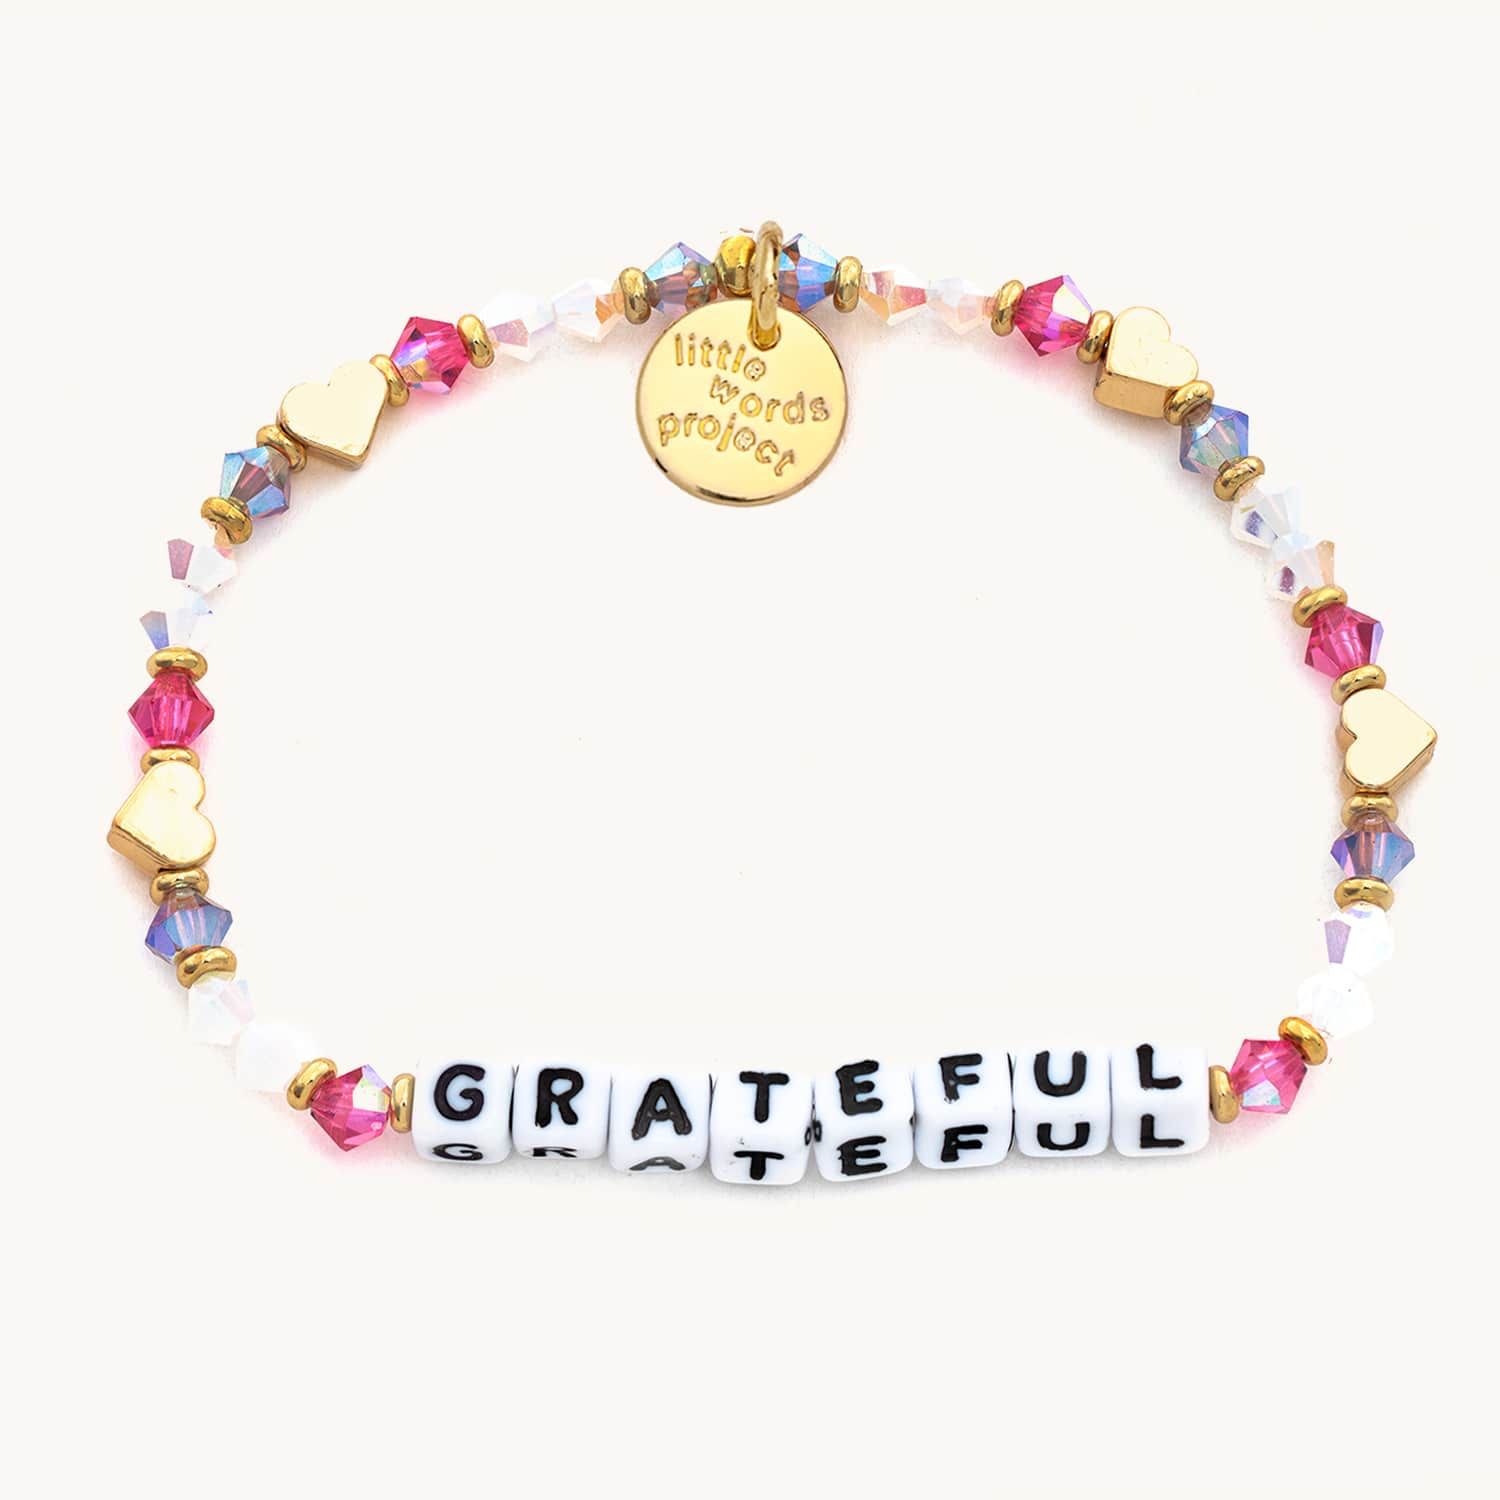 Grateful- Lucky Symbols | Little Words Project